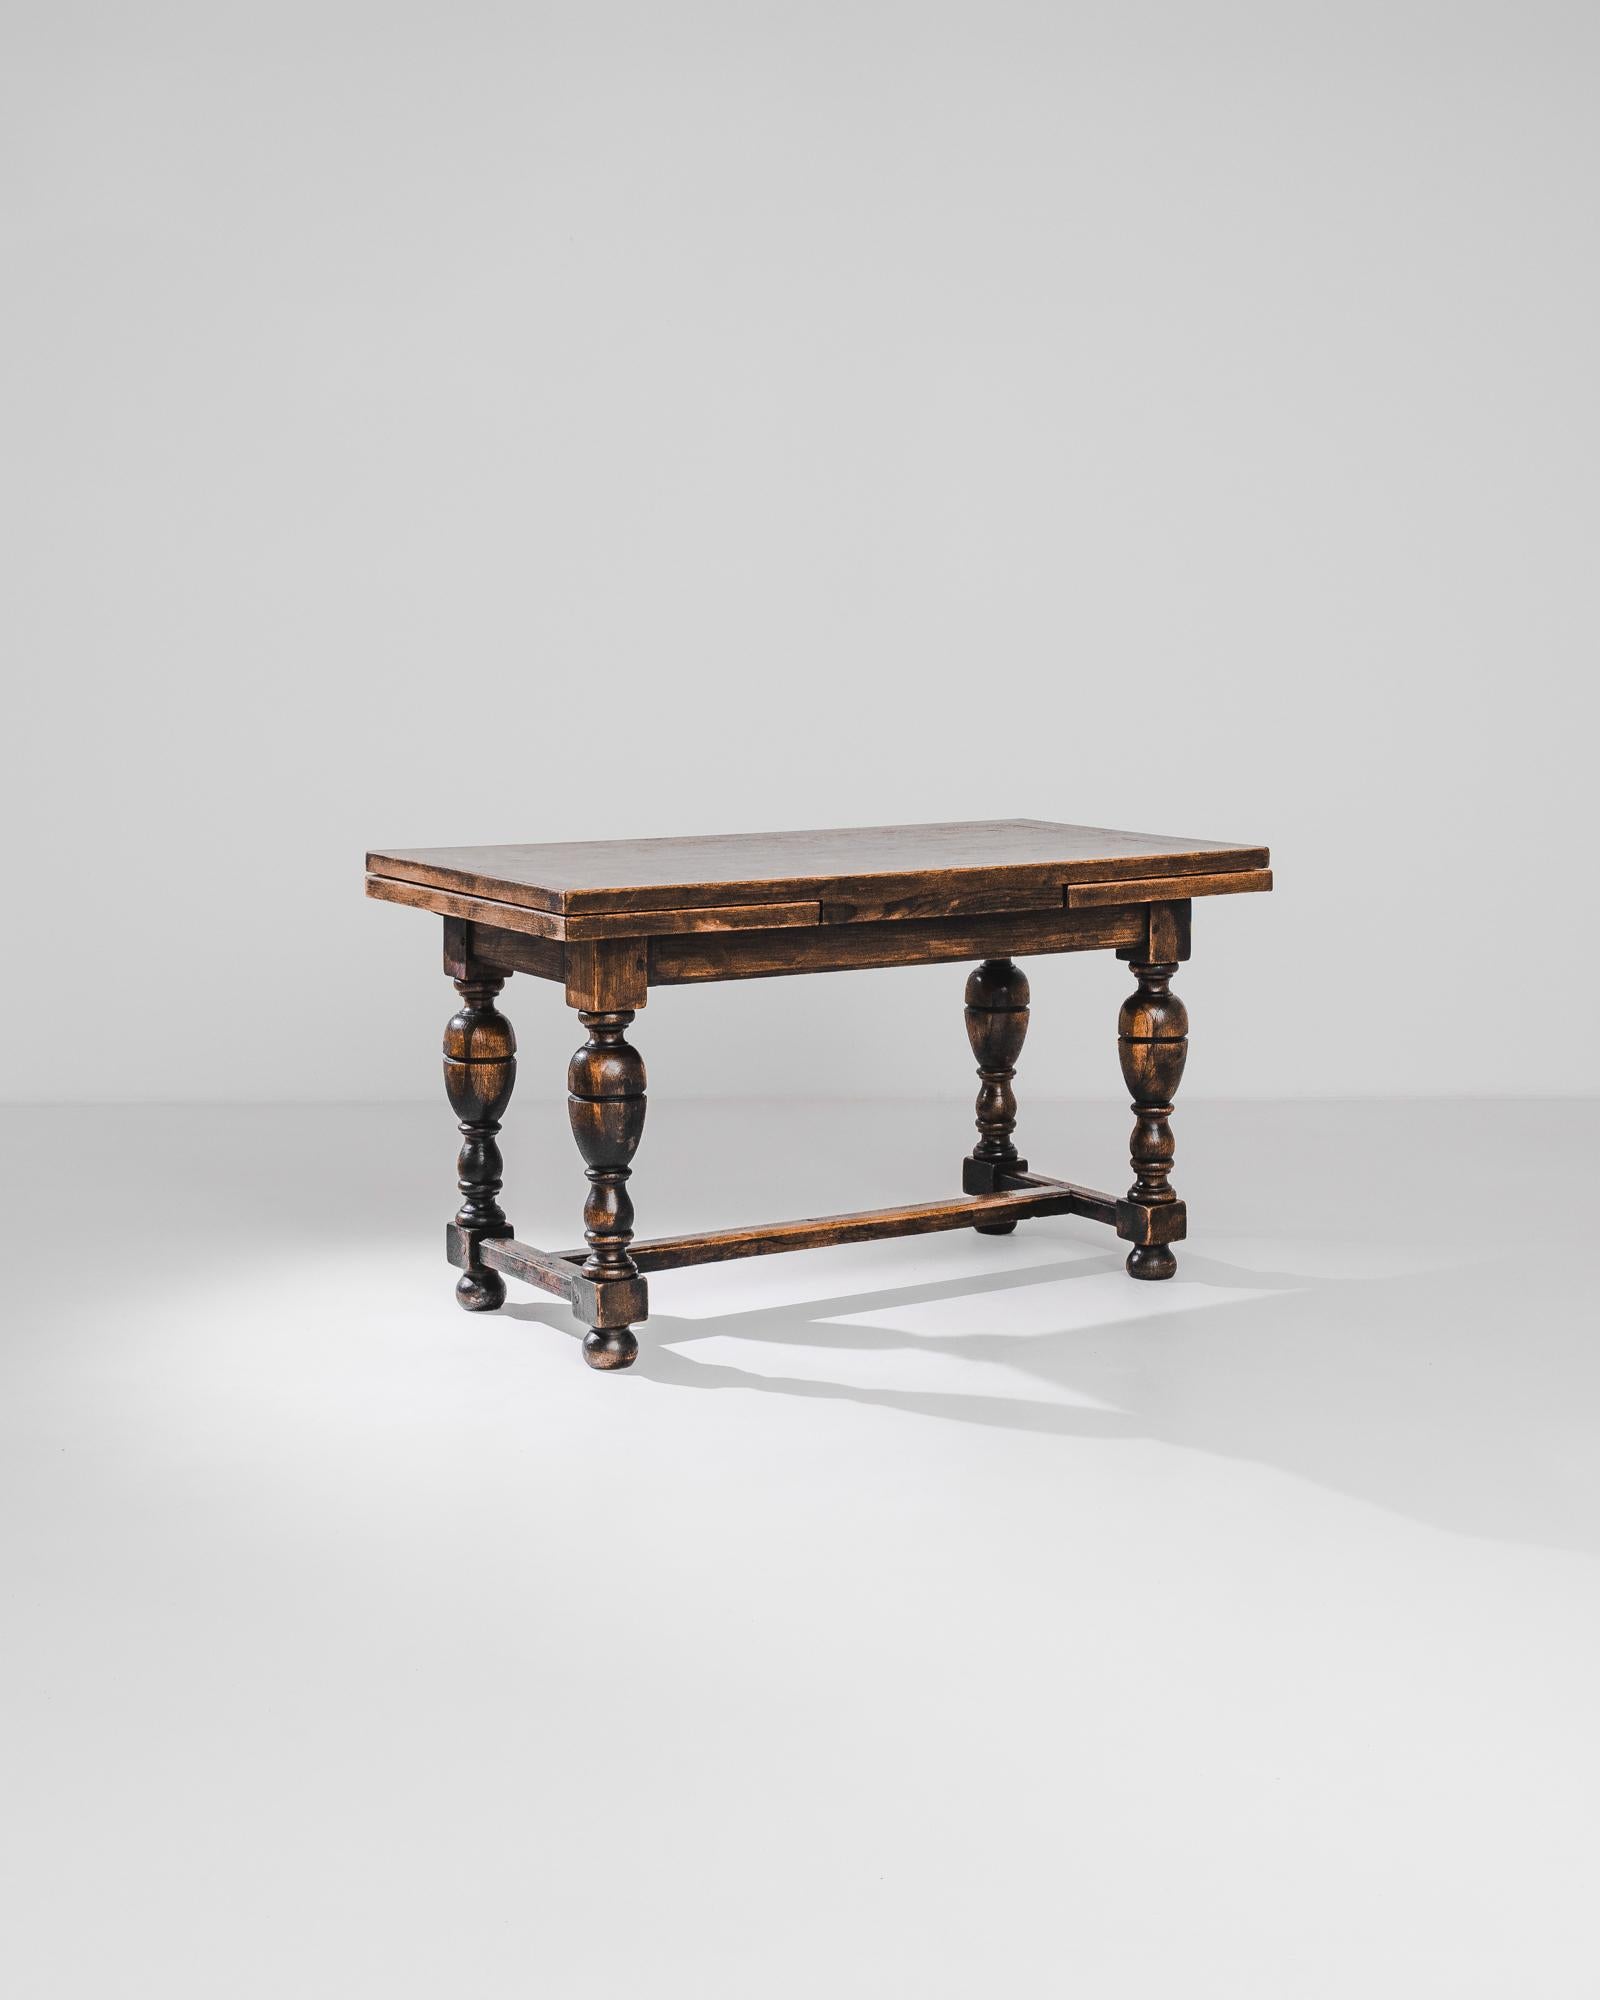 A Belgian wooden table with original patina, circa 1880. The folding tabletop, decorated by a solemn geometric ornamentation, transforms an intimate meal into a full-length dining table. Its sturdiness is accentuated by the laboriously carved